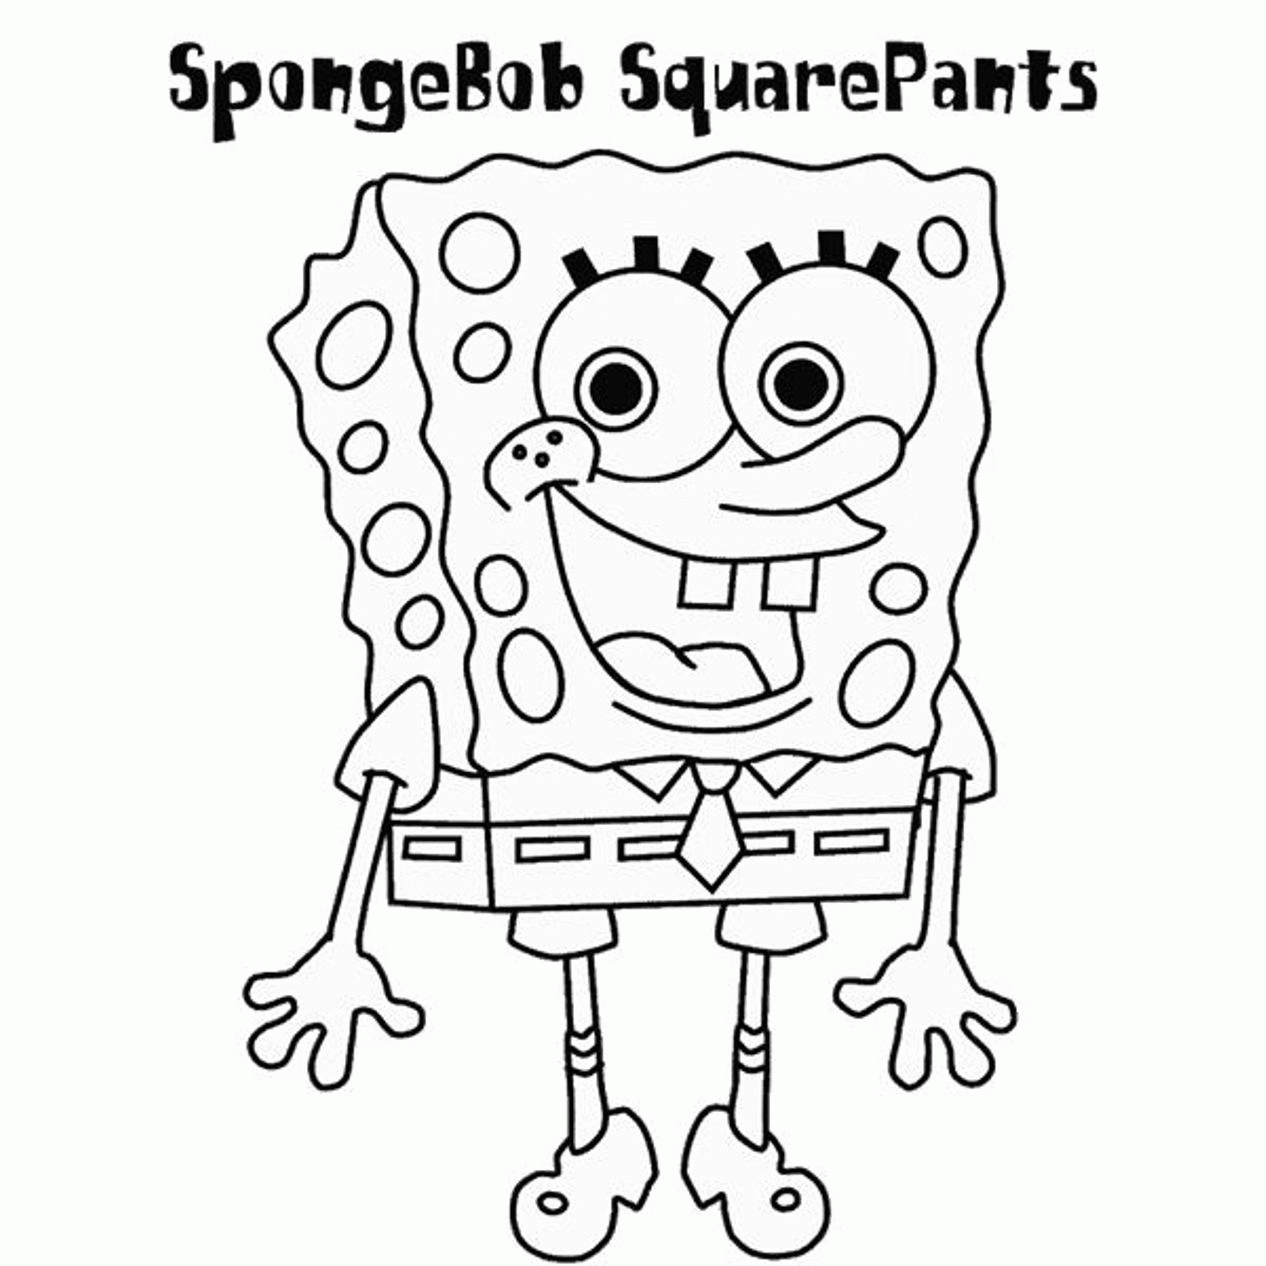 Spongebob Squarepants Coloring Page - Coloring Pages for Kids and ...